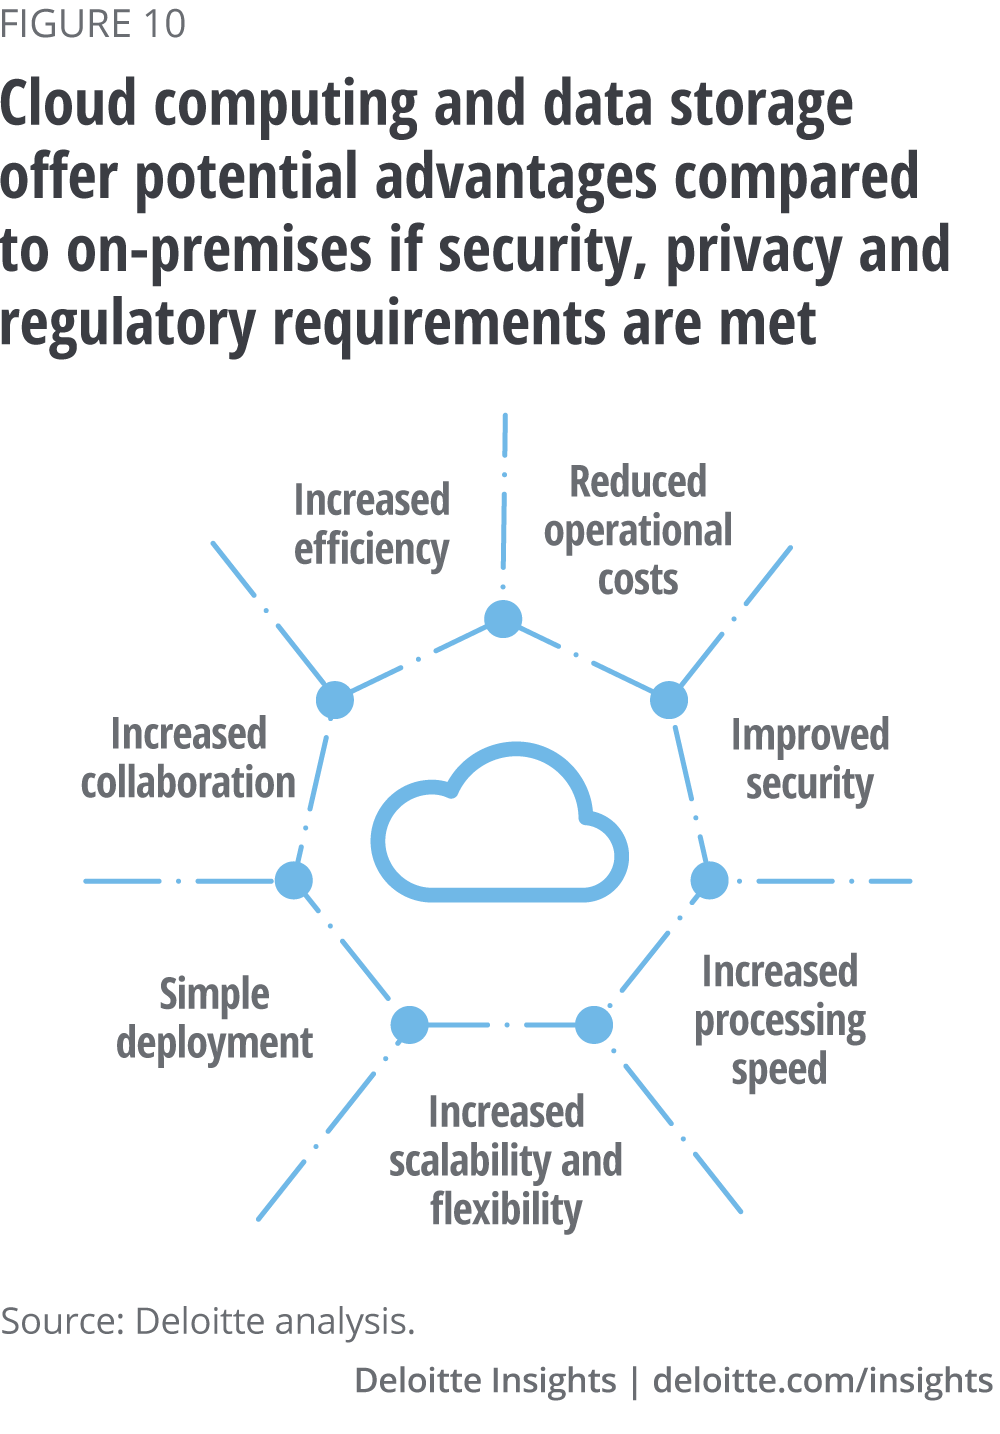 Cloud computing and data storage offer potential advantages compared to on-premises if security, privacy and regulatory requirements are met